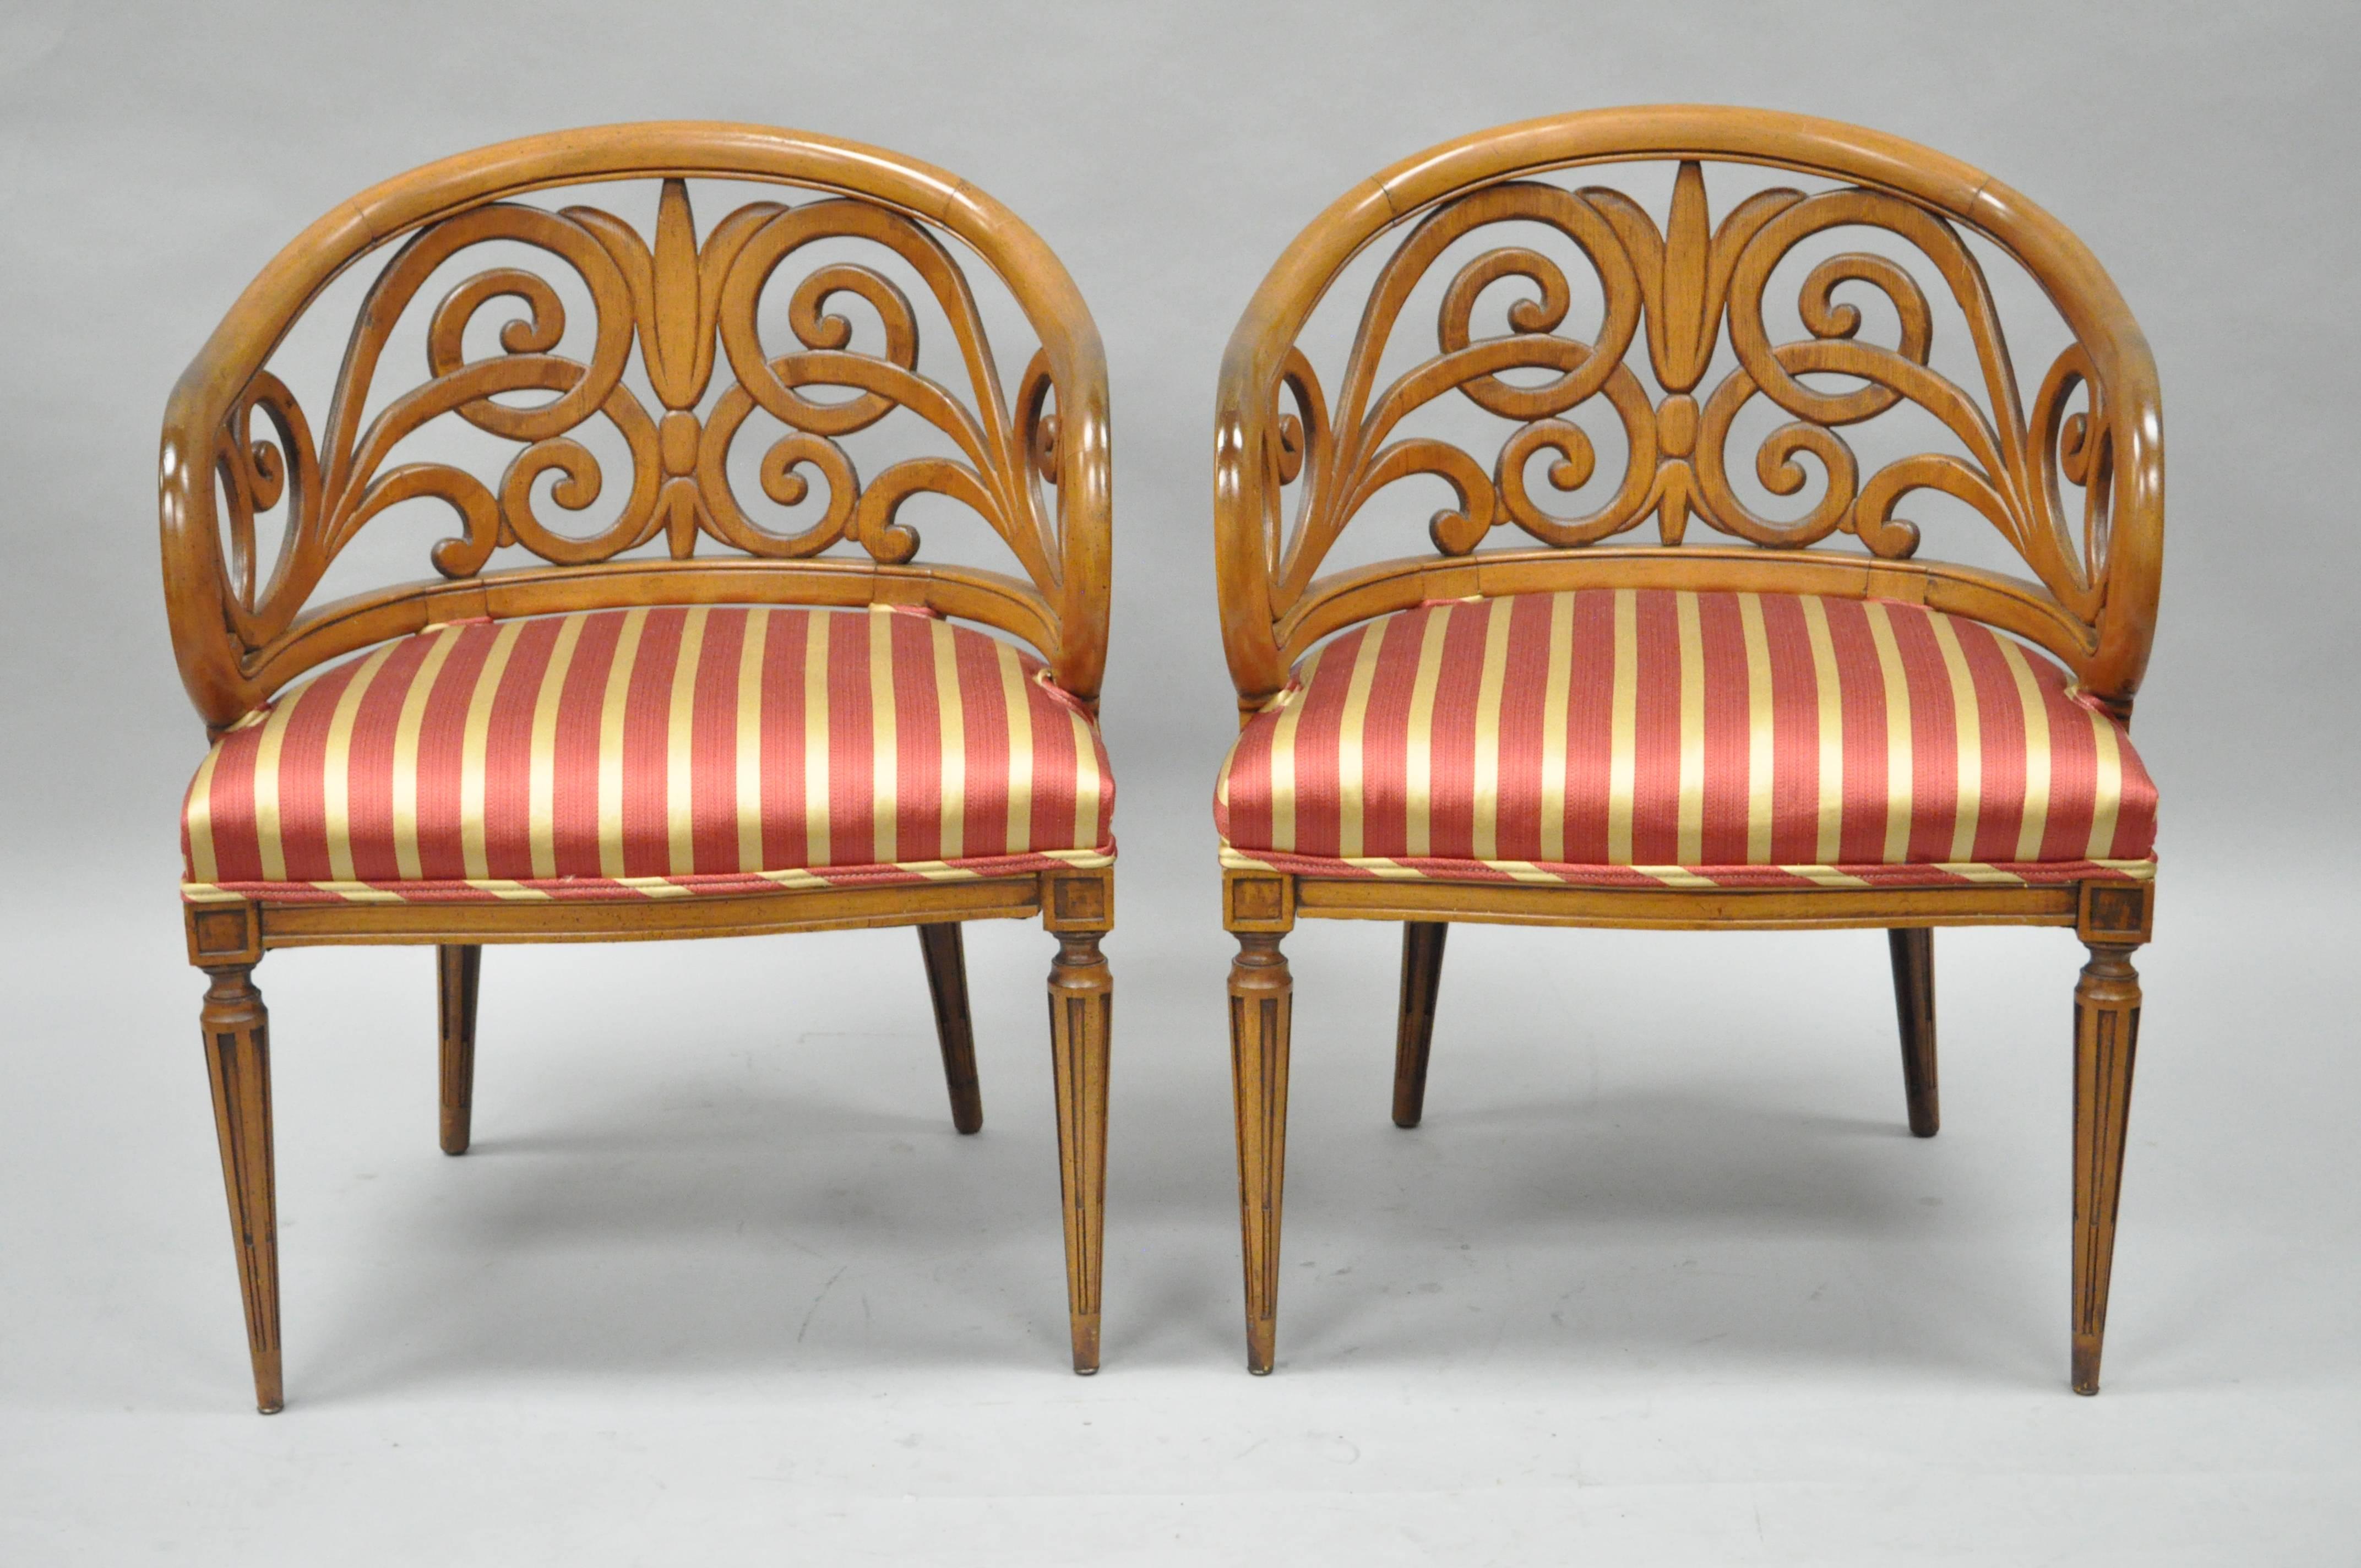 Unique pair of ornate vintage fancy barrel back Hollywood Regency chairs. Item features pierce carved whimsical barrel back walnut frames with bell flower central design, reeded and tapered legs, and great French Hollywood Regency form. Style very